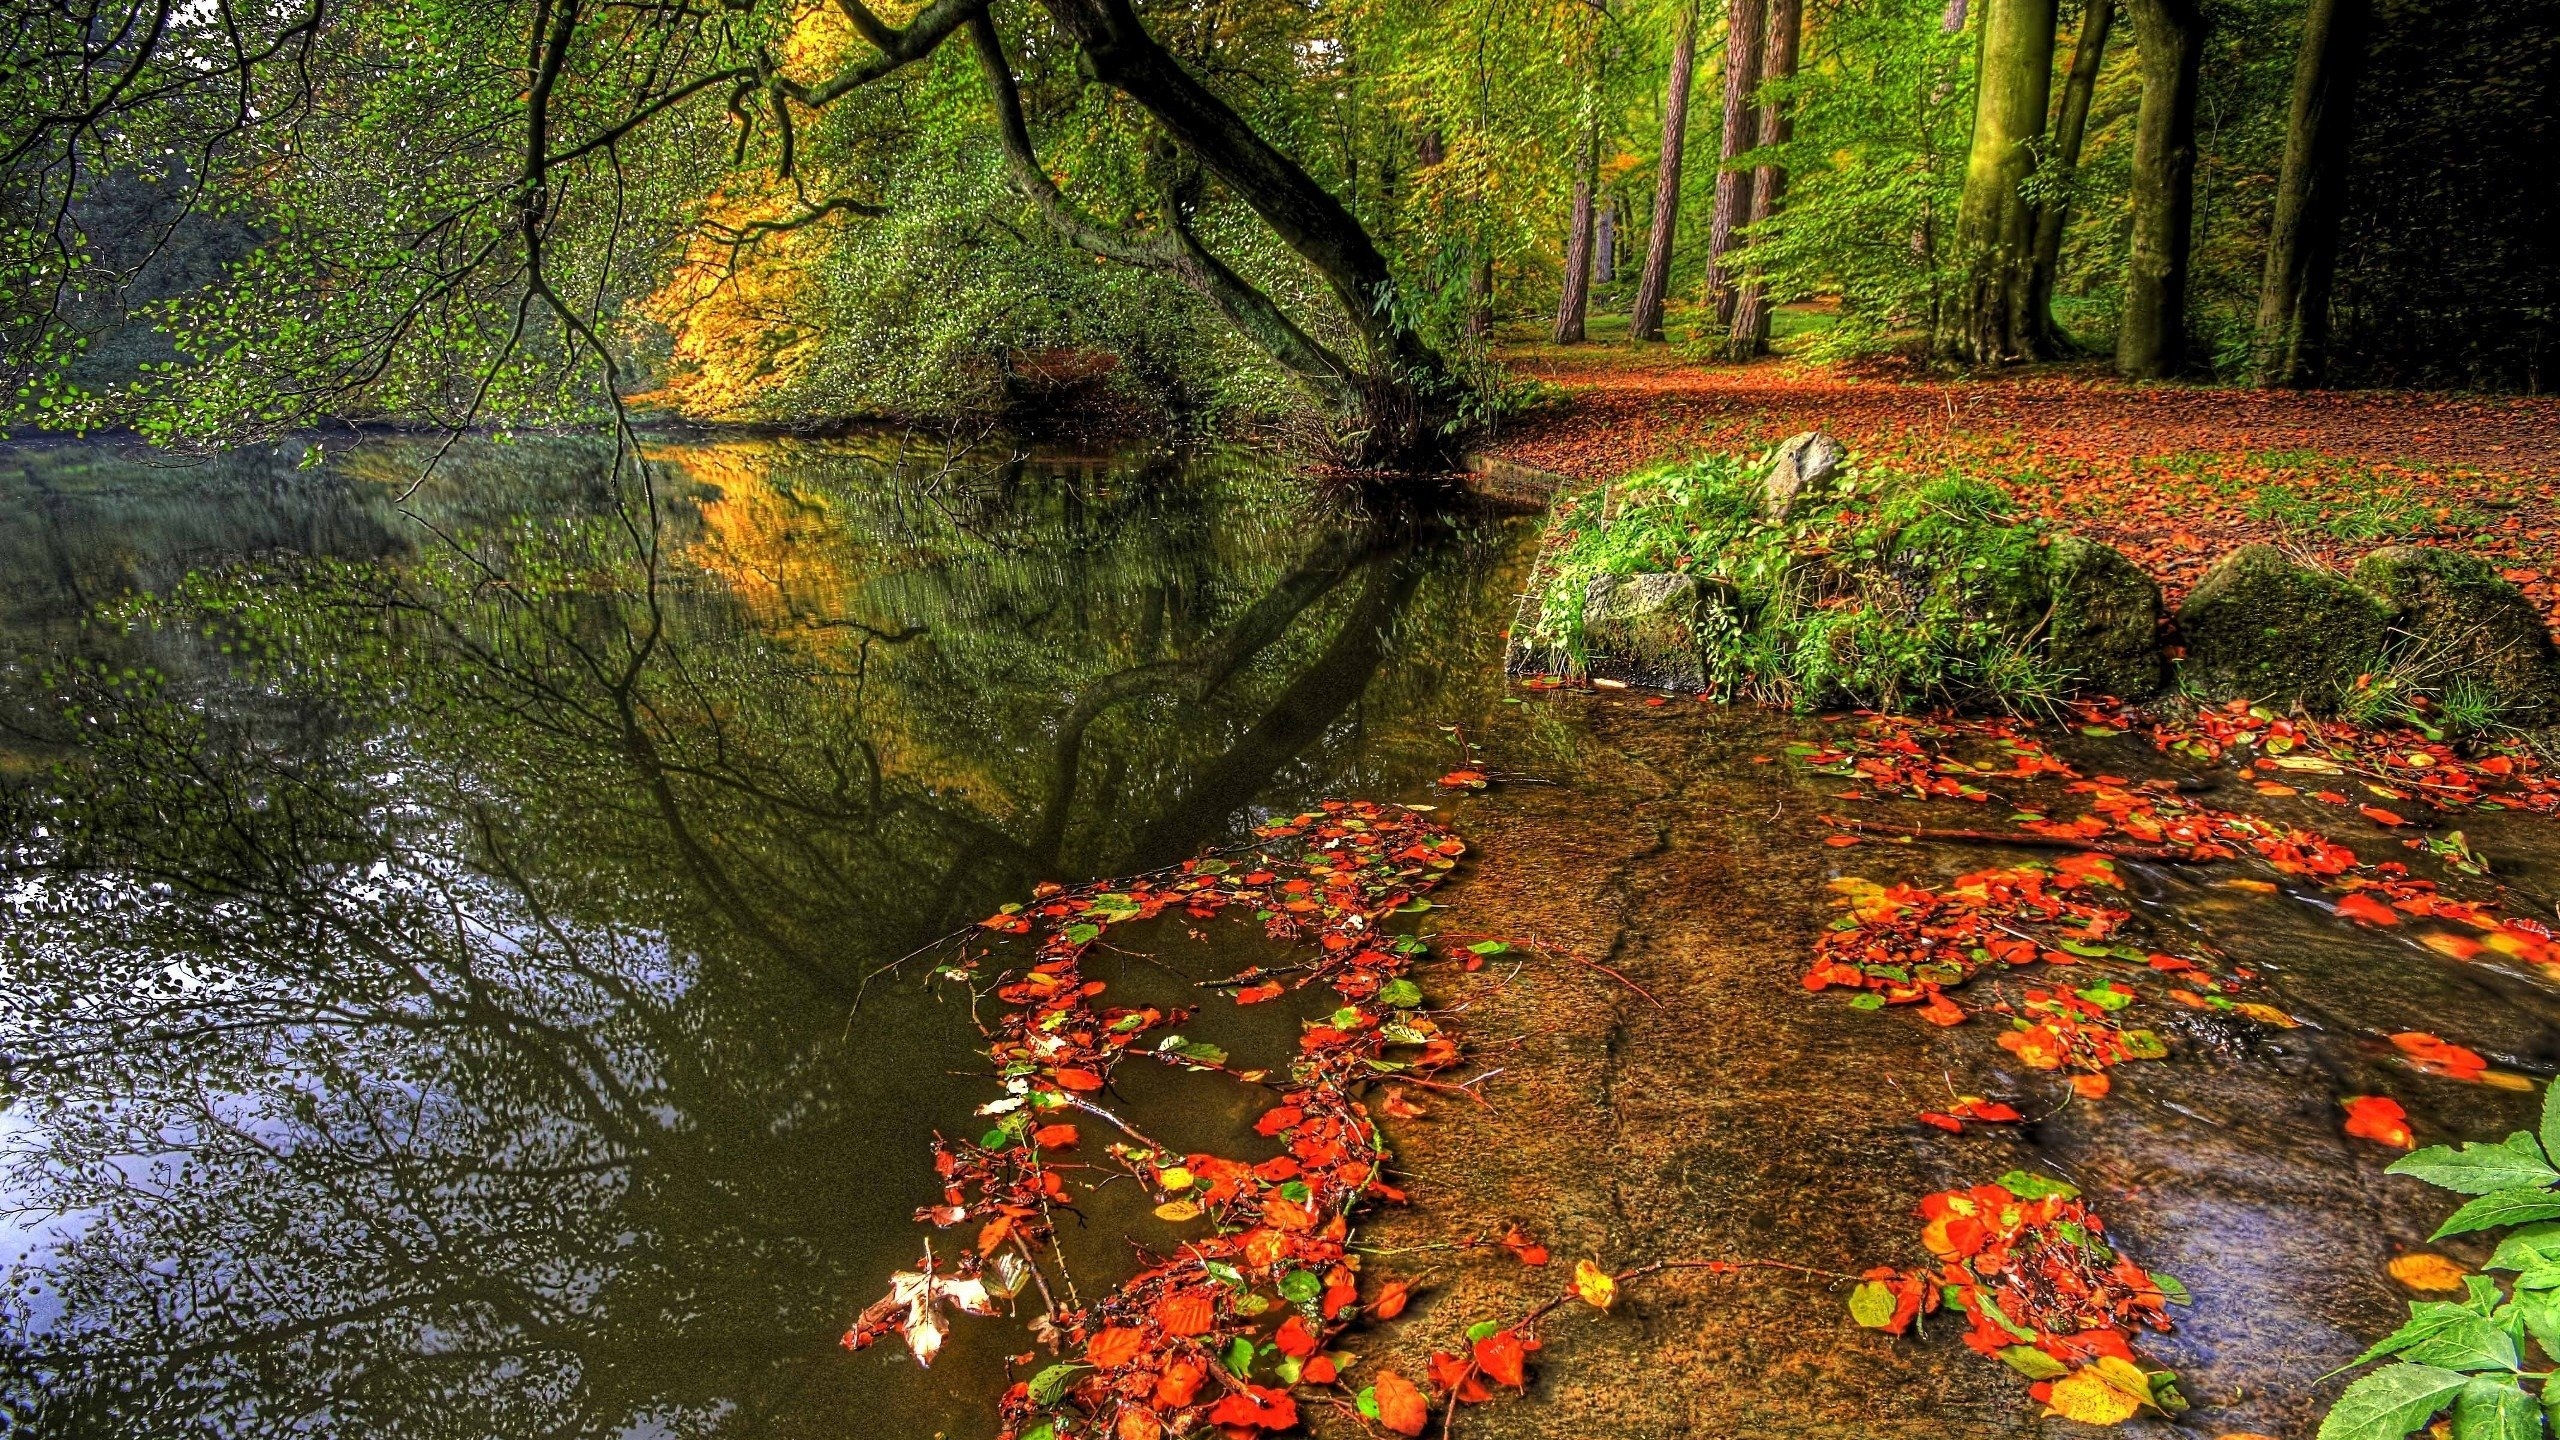 Autumn over the forest for 2560x1440 HDTV resolution